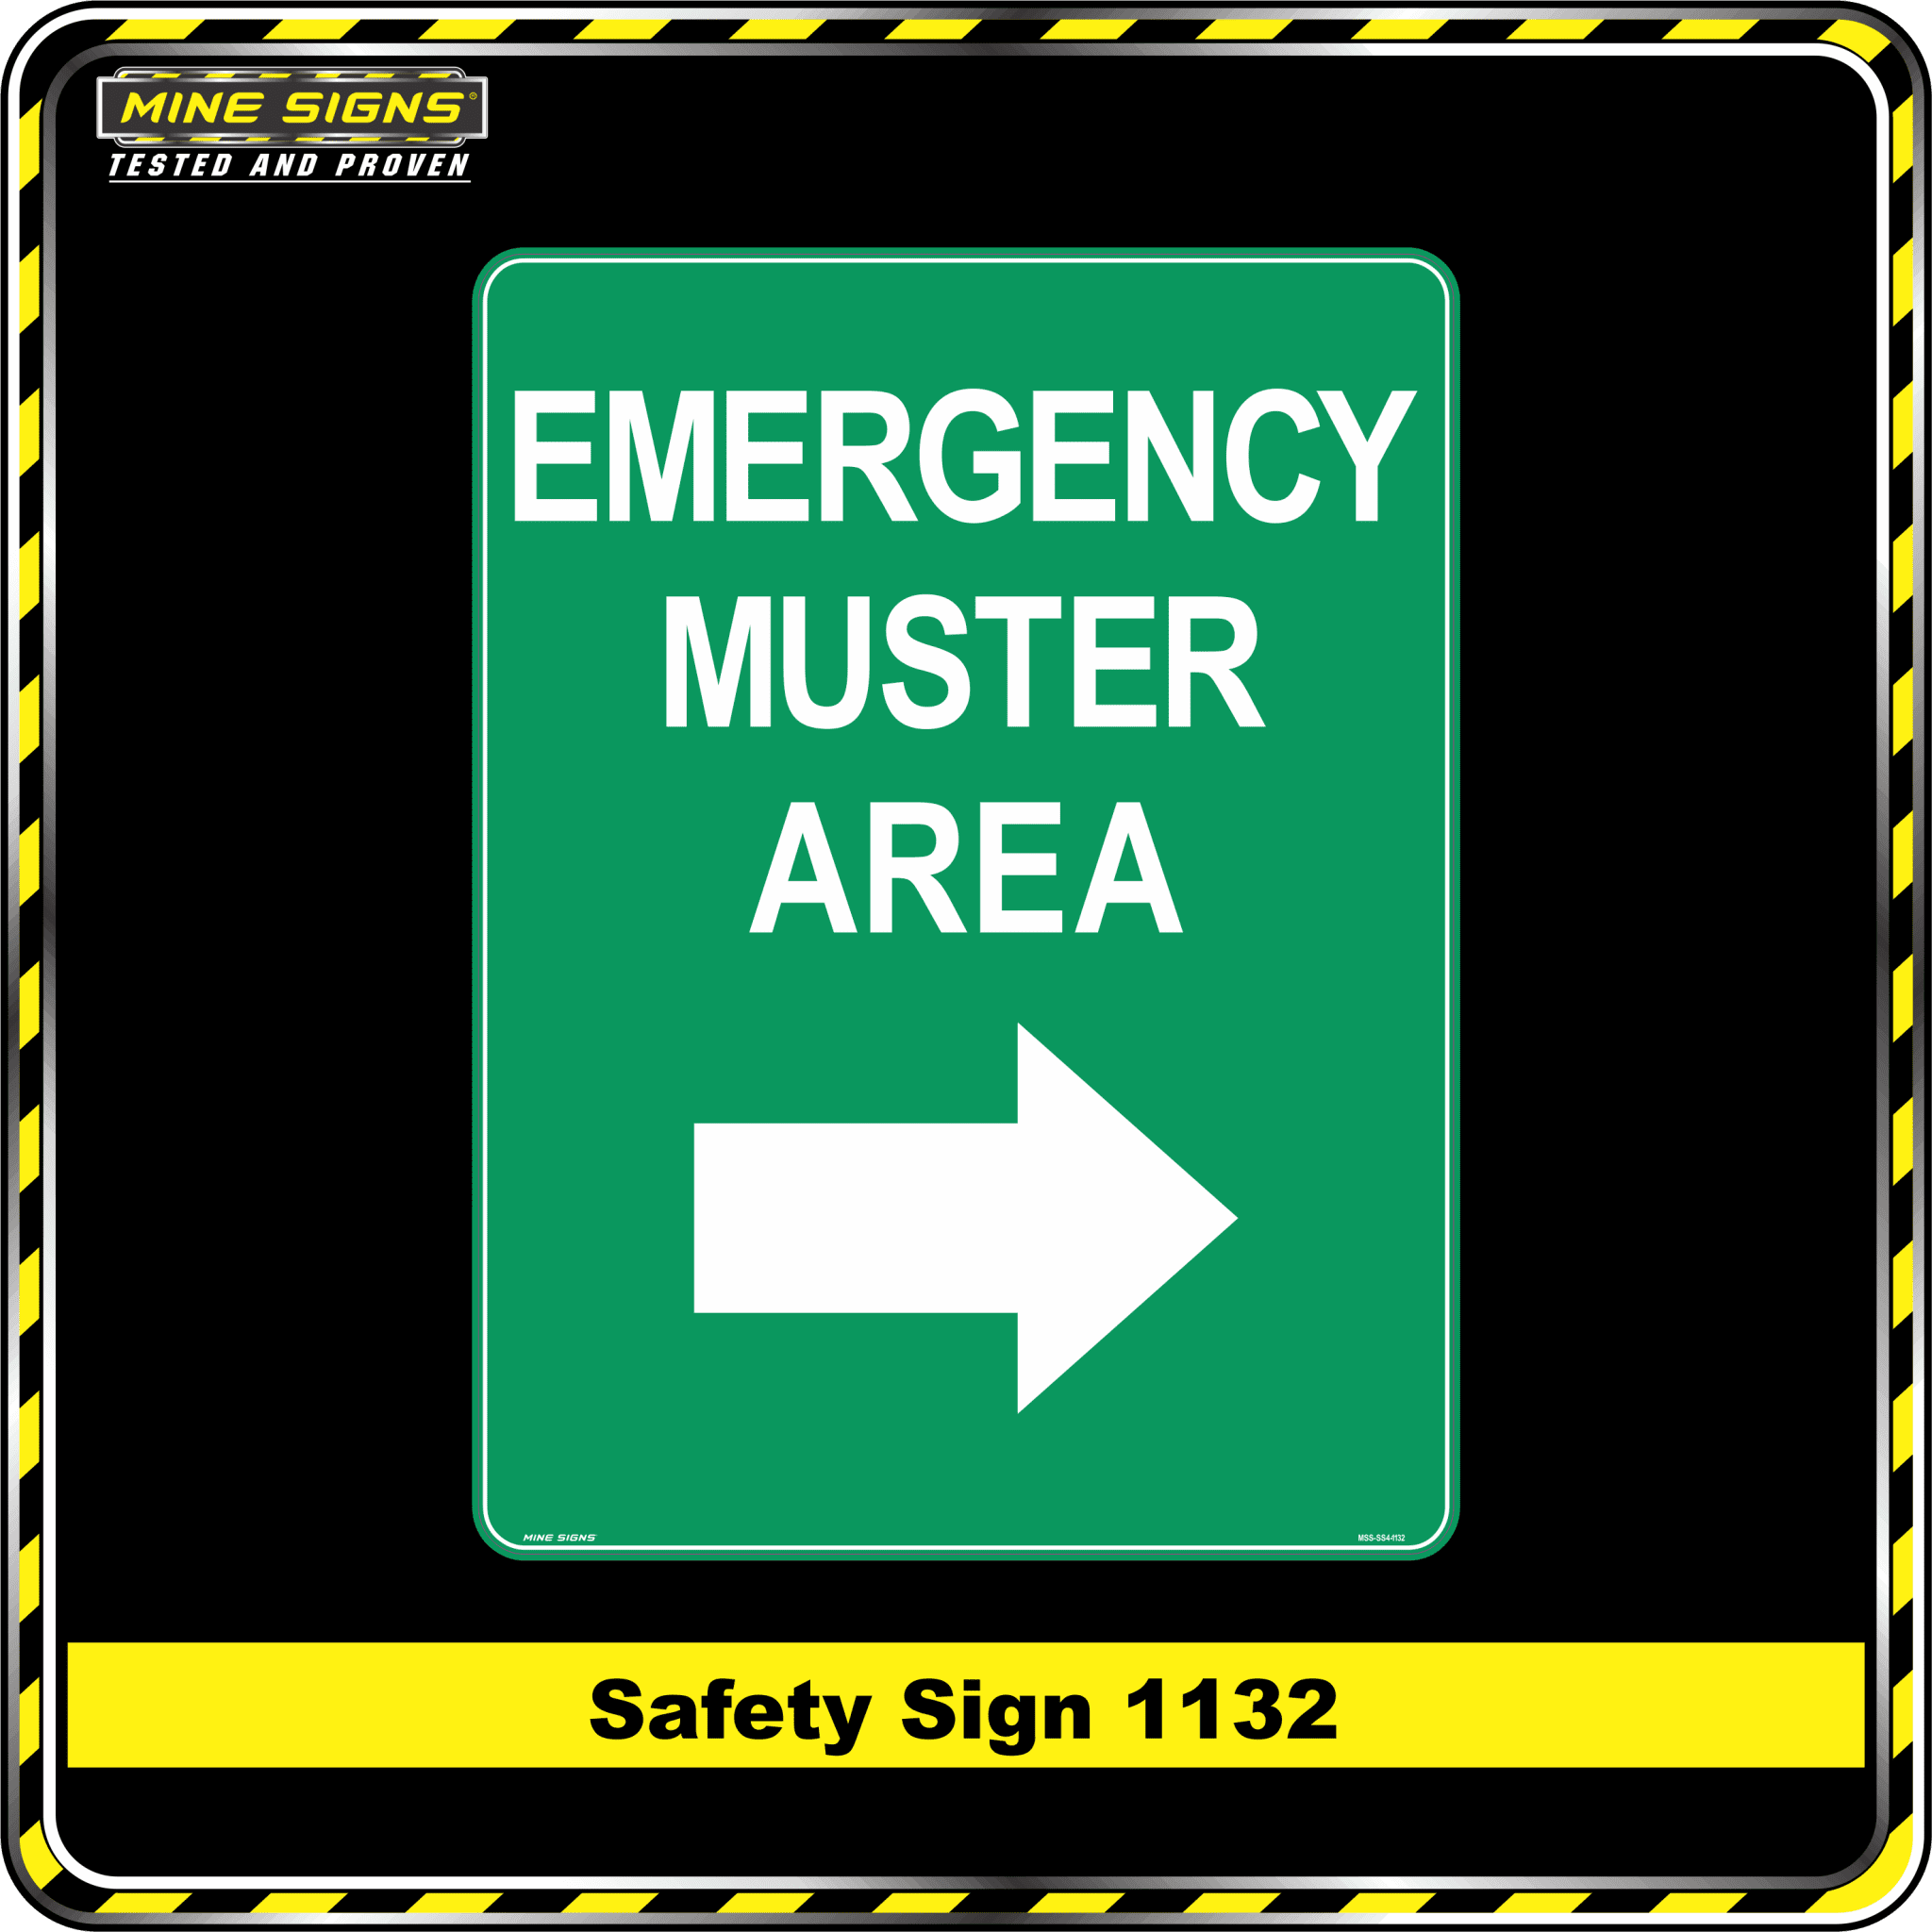 Emergency Muster Area (Arrow Right)